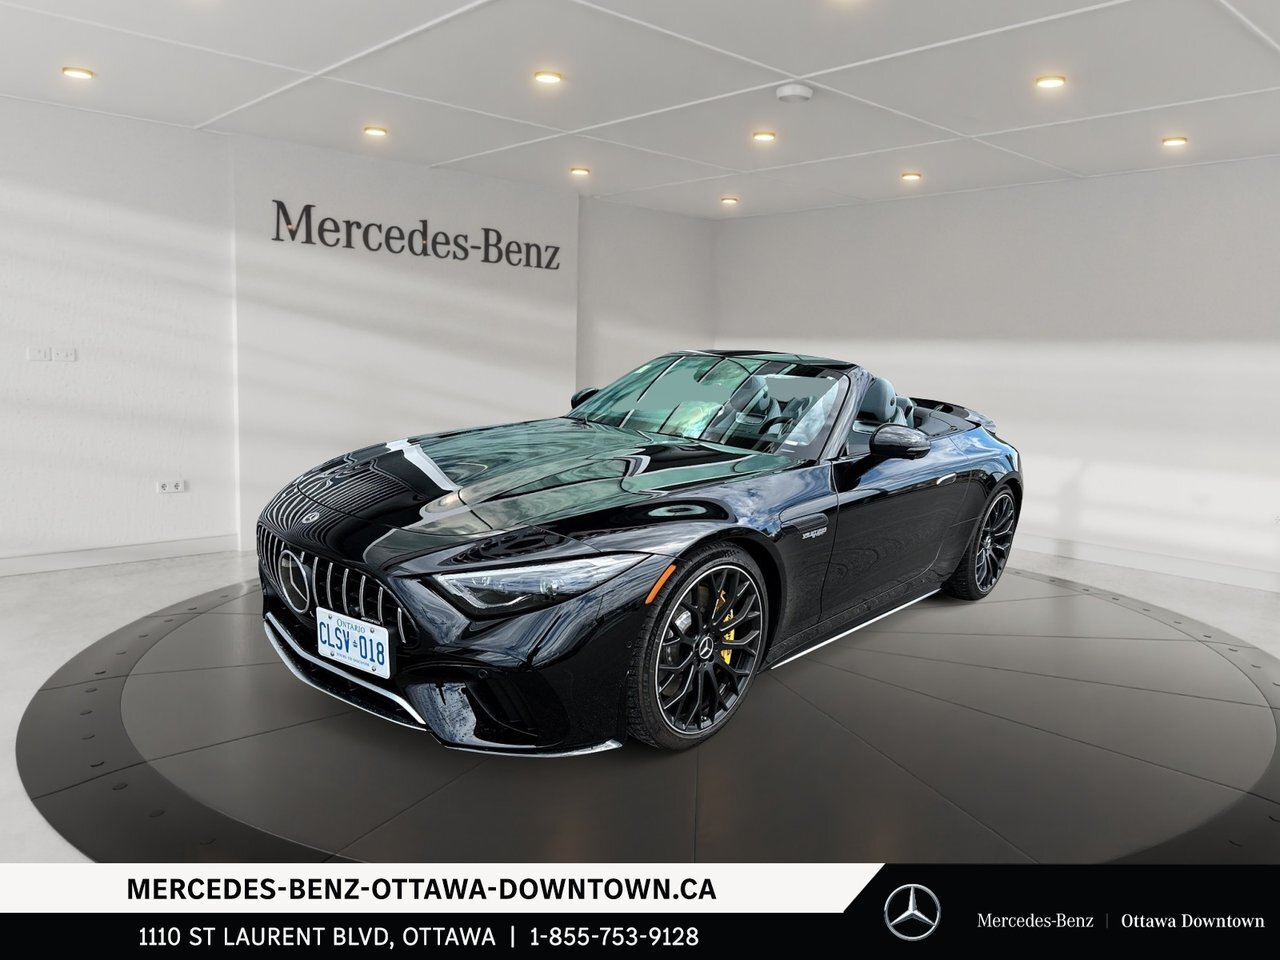 2022 Mercedes-Benz SL63 AMG Roadster - Beautiful build No Luxury tax! just in 